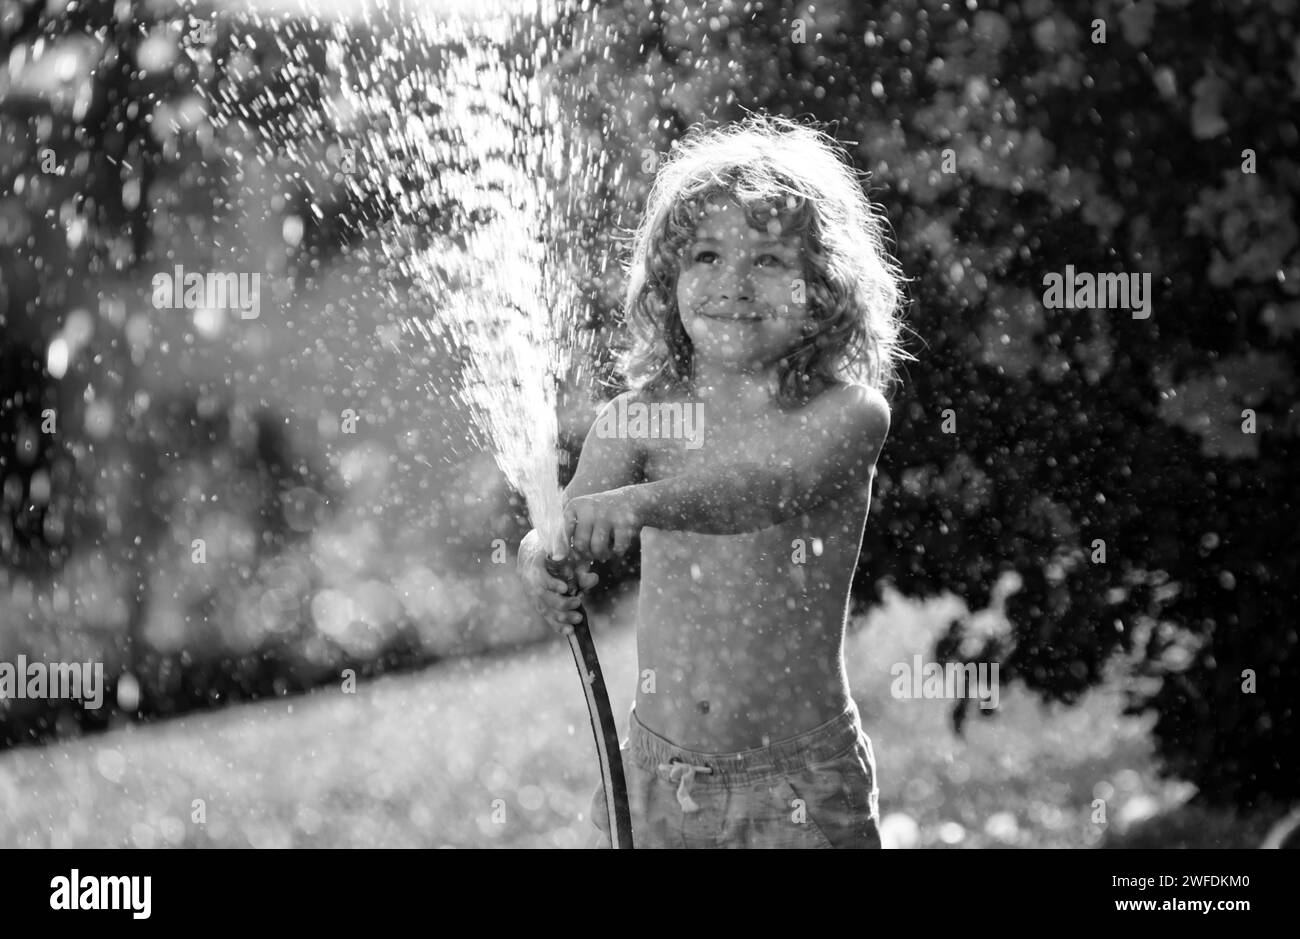 Kid having fun in domestic garden. Child hold watering garden hose. Active outdoors games for kids in the backyard during harvest time. Stock Photo